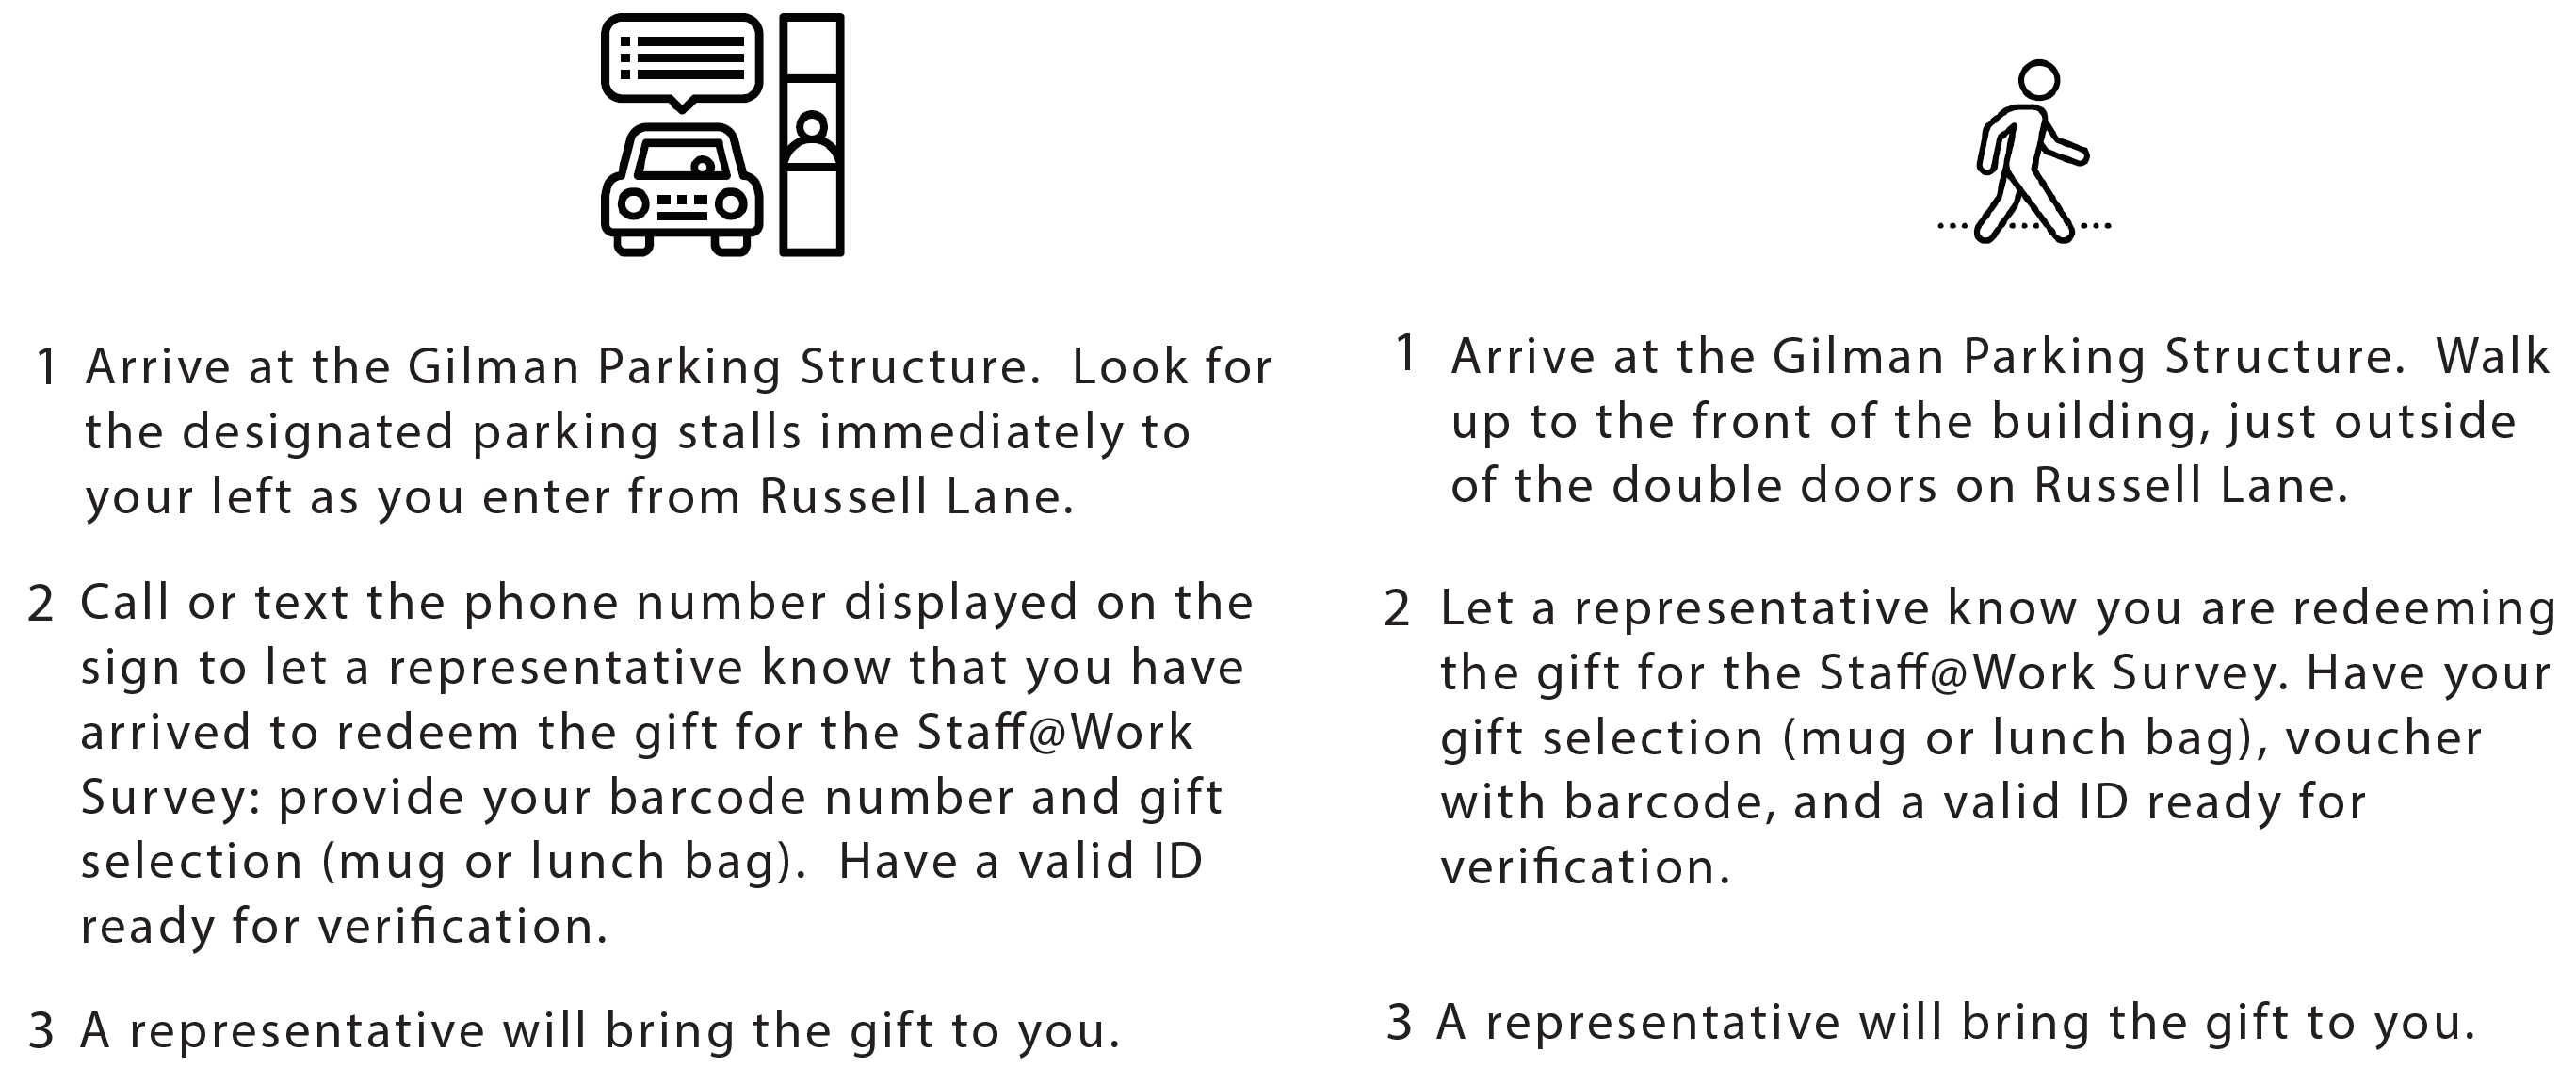 Drive up and walk up instructions for redeeming gifts